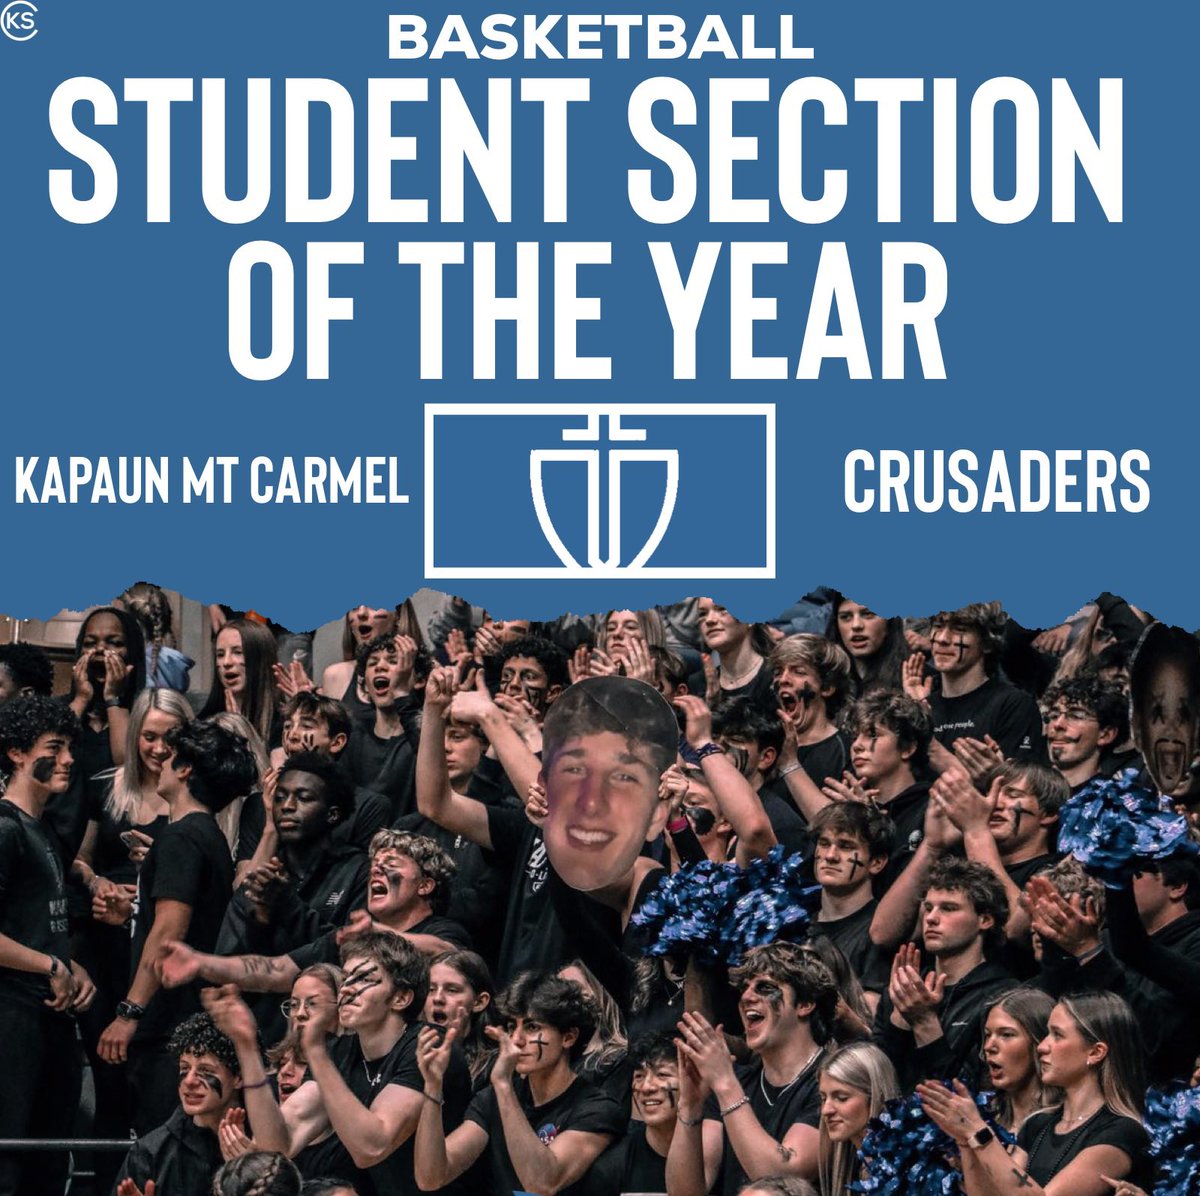 The 2023 Basketball Student Section of the Year is the Kapaun Mt Carmel Crusaders